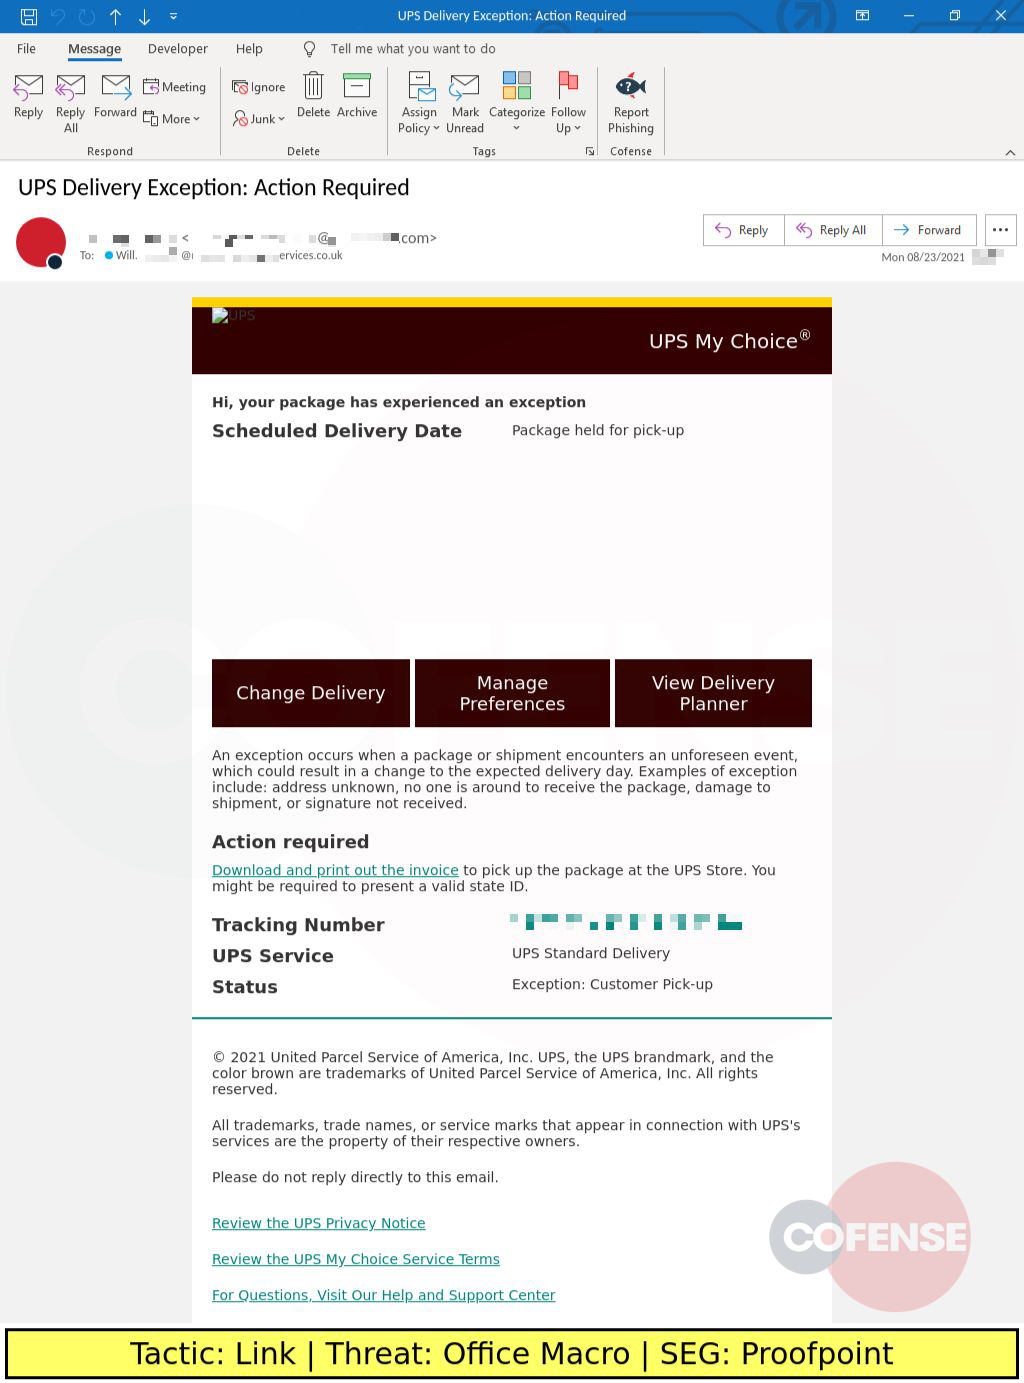 Real Phishing Example: UPS-spoofing emails found in environments protected by Proofpoint to deliver Office macro laden document via an embedded URL.